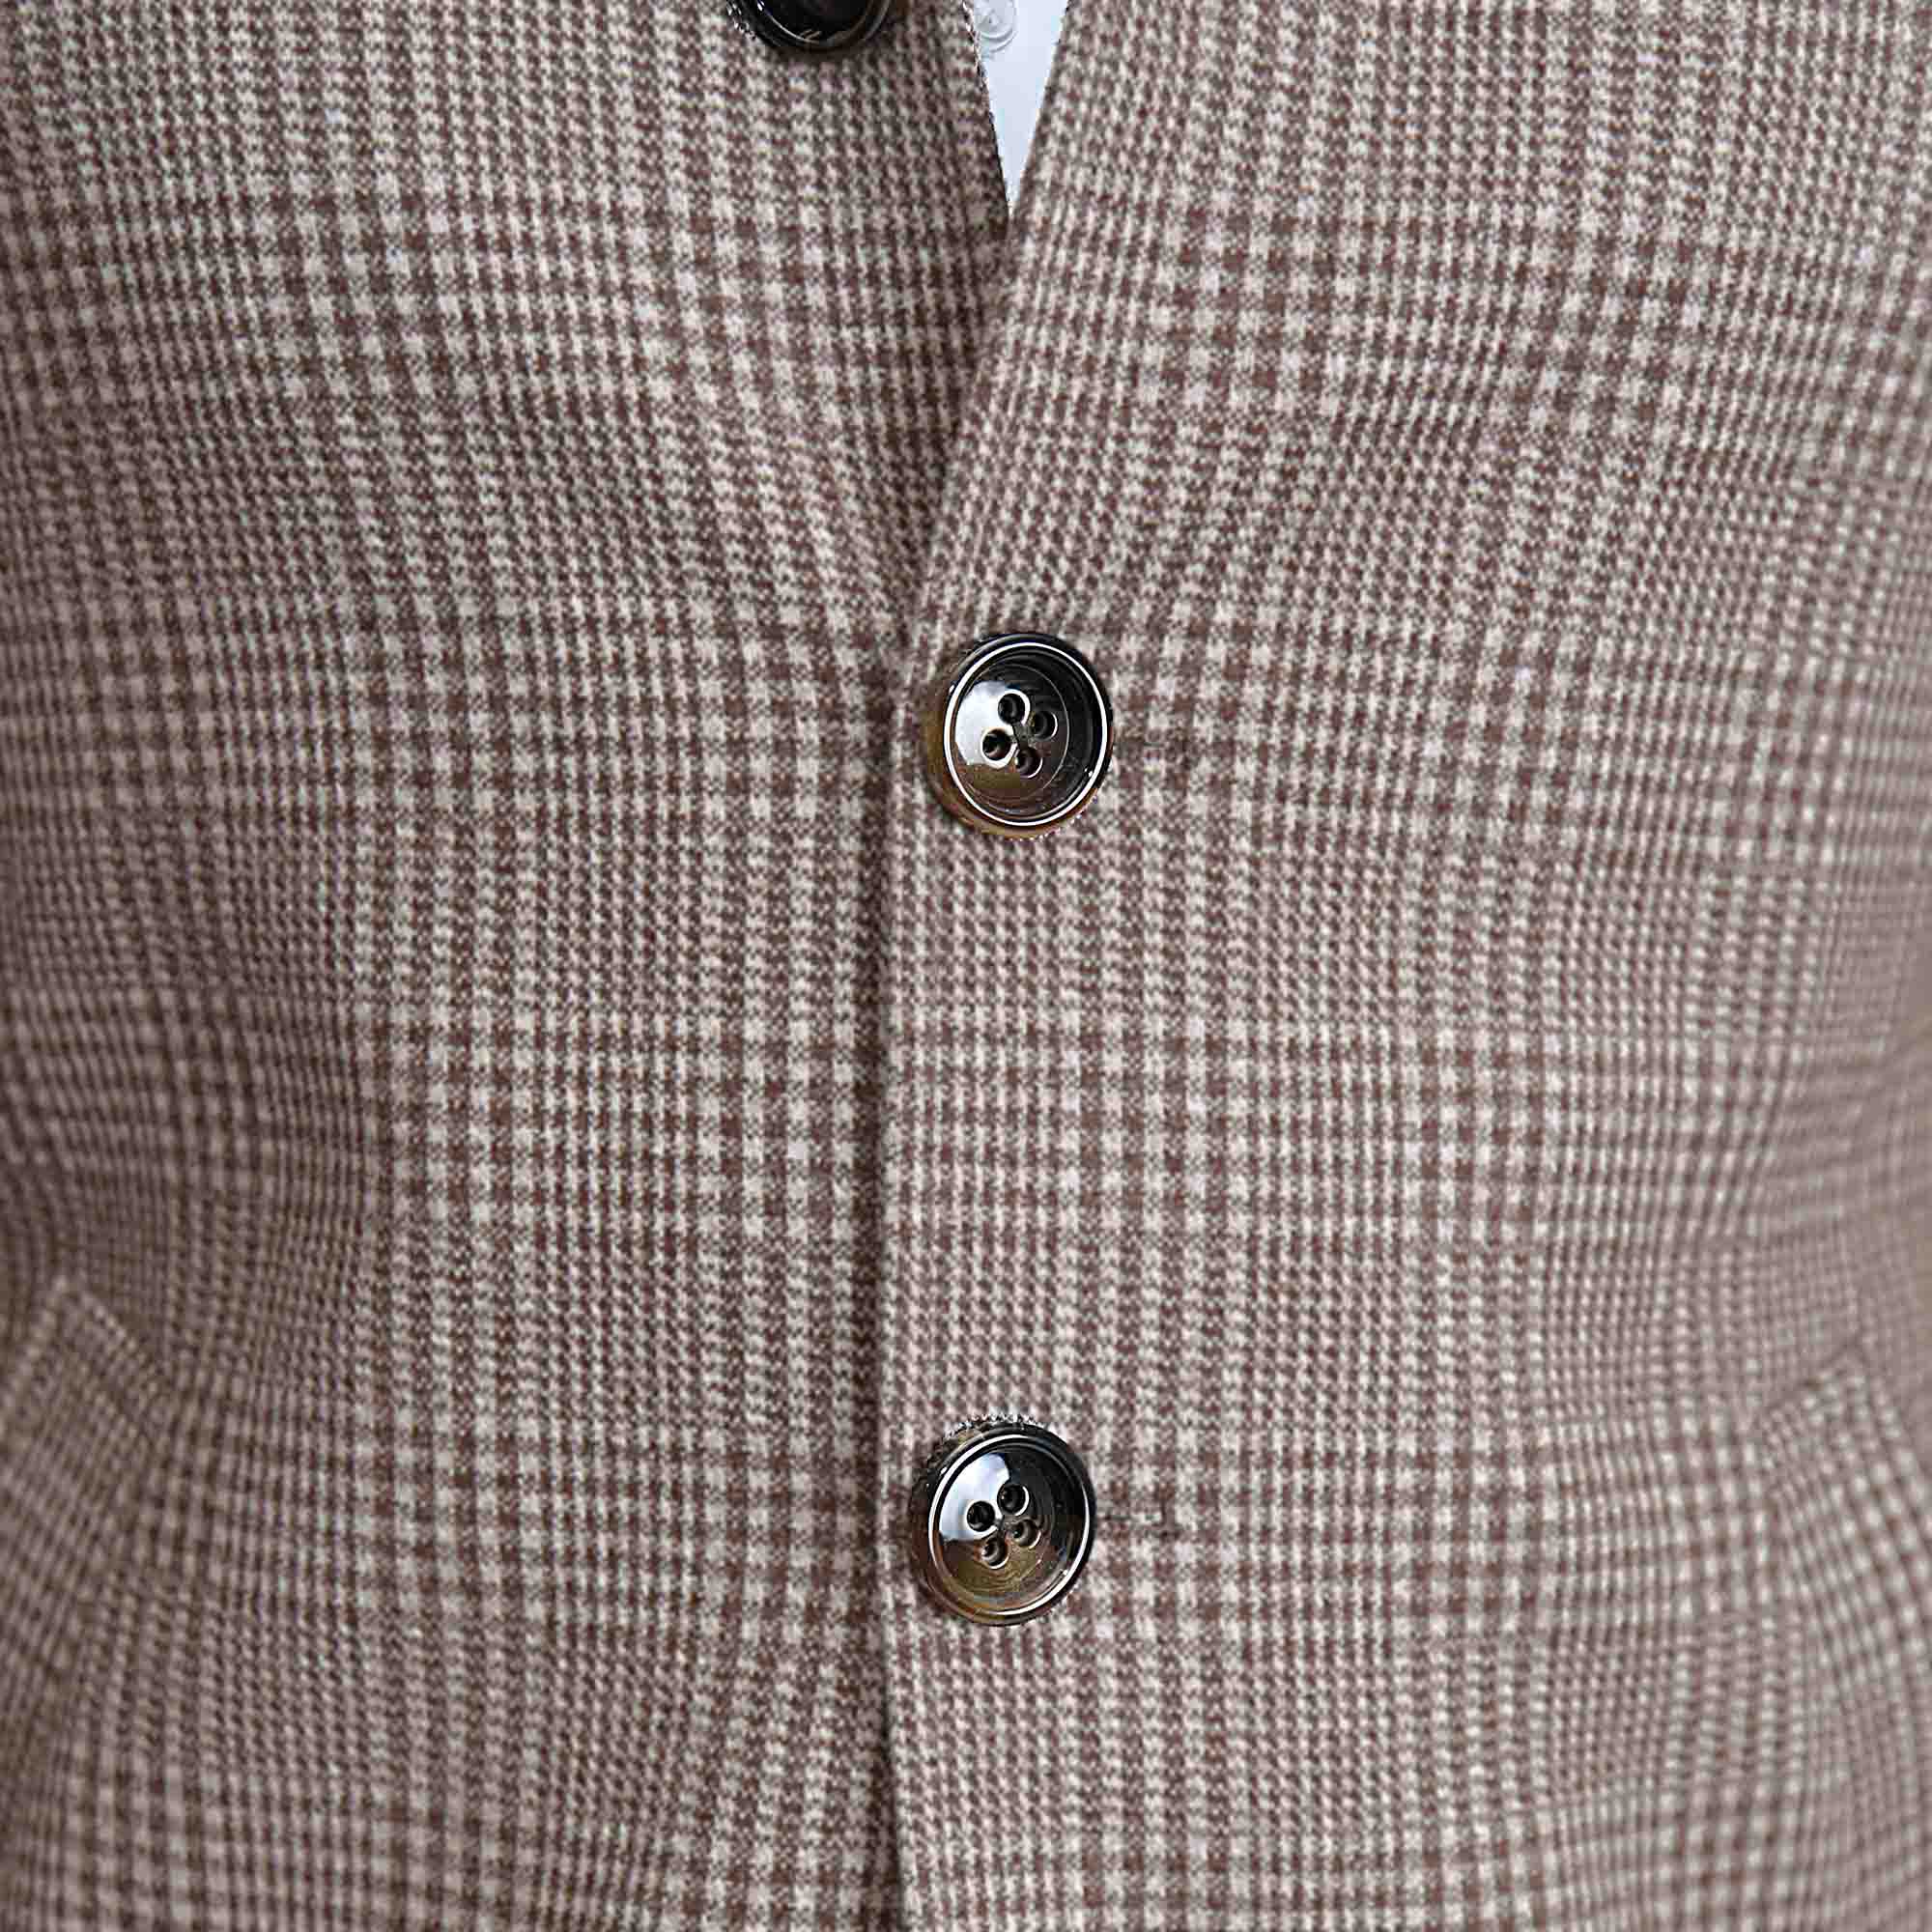 Brown Plaid Open Button Overcoat